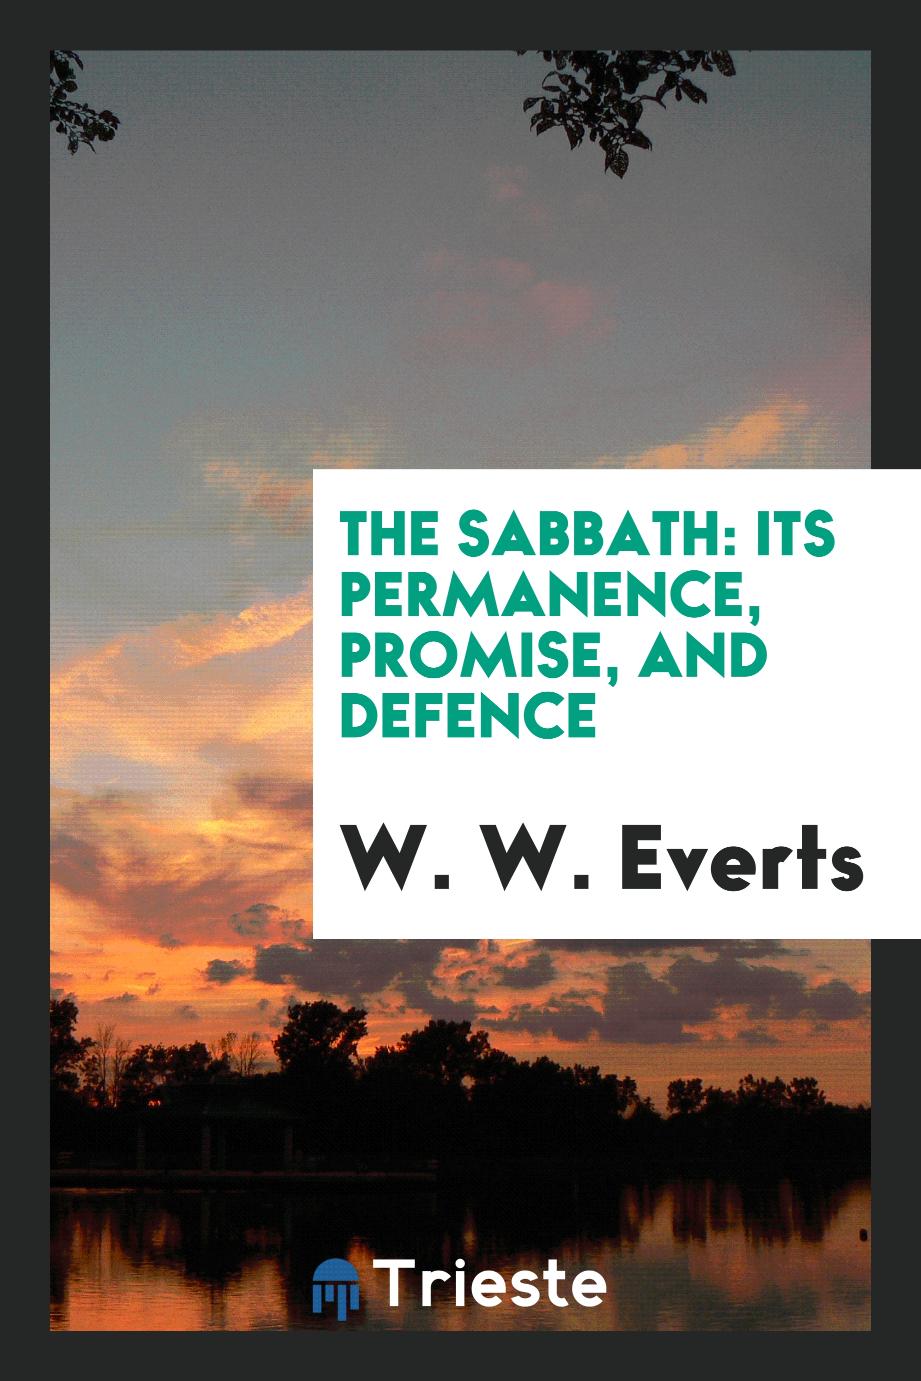 The Sabbath: its permanence, promise, and defence